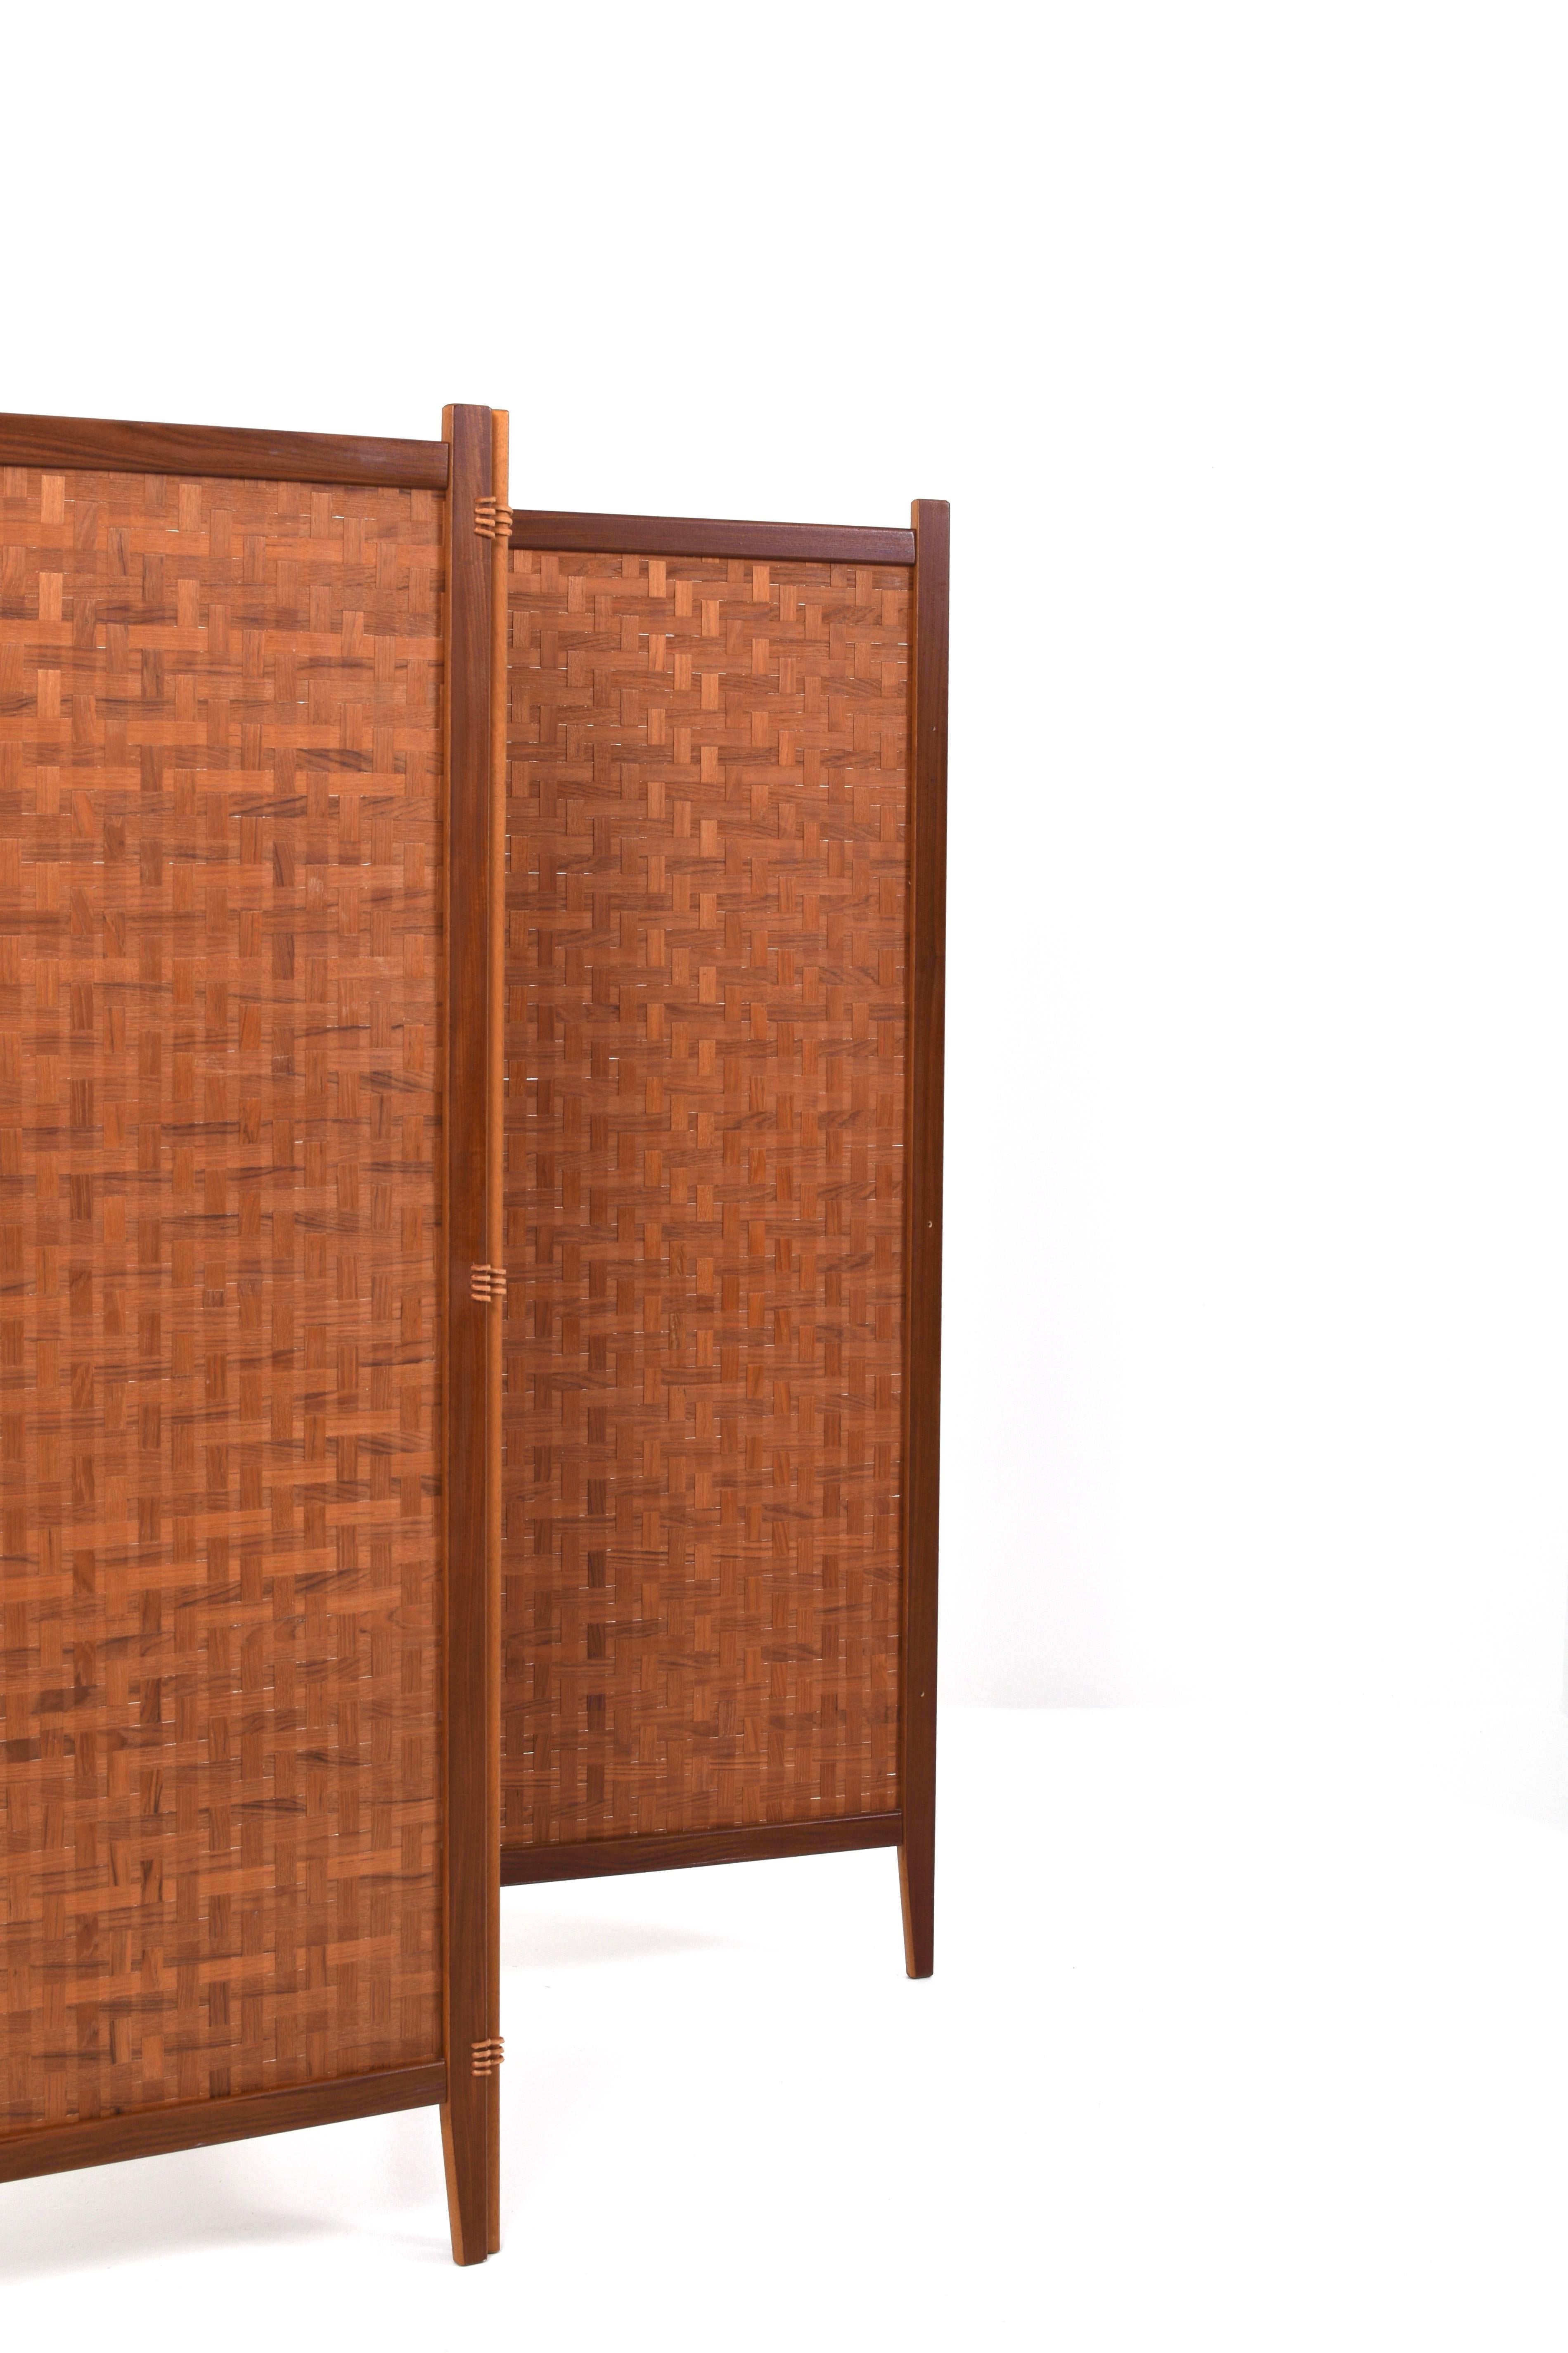 Swedish Teak and Leather Room Divider Spåna from Alberts Tibro, 1950s For Sale